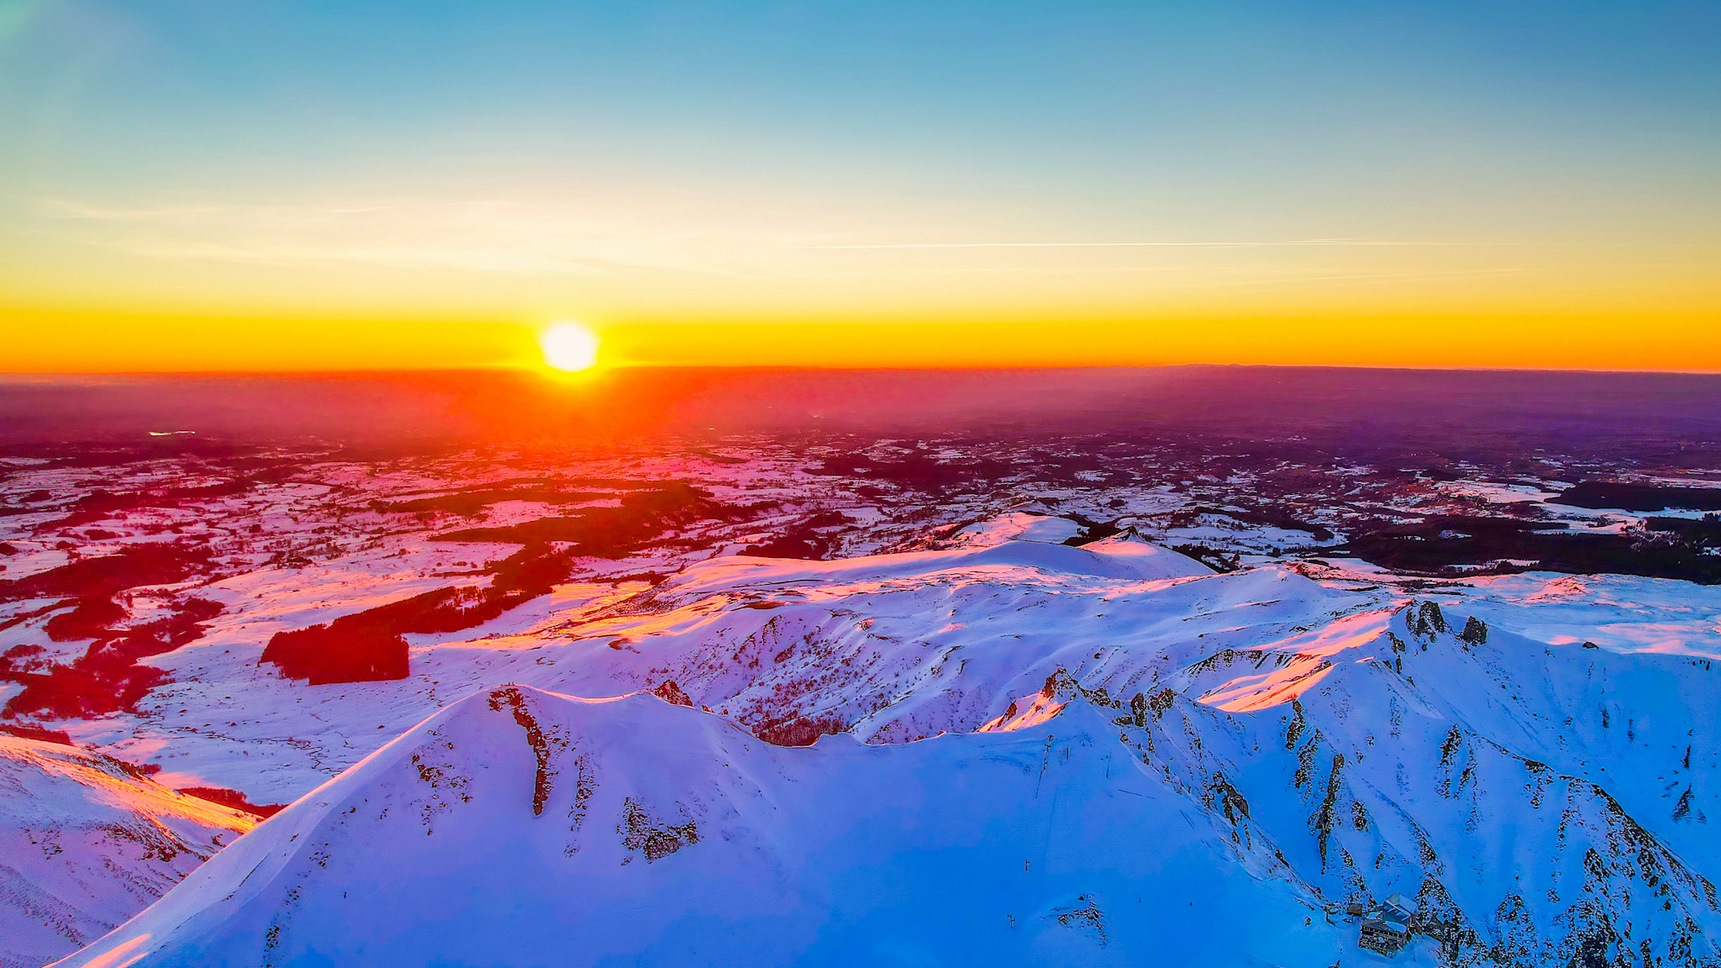 Sunset at the top of Puy de Sancy under the snow